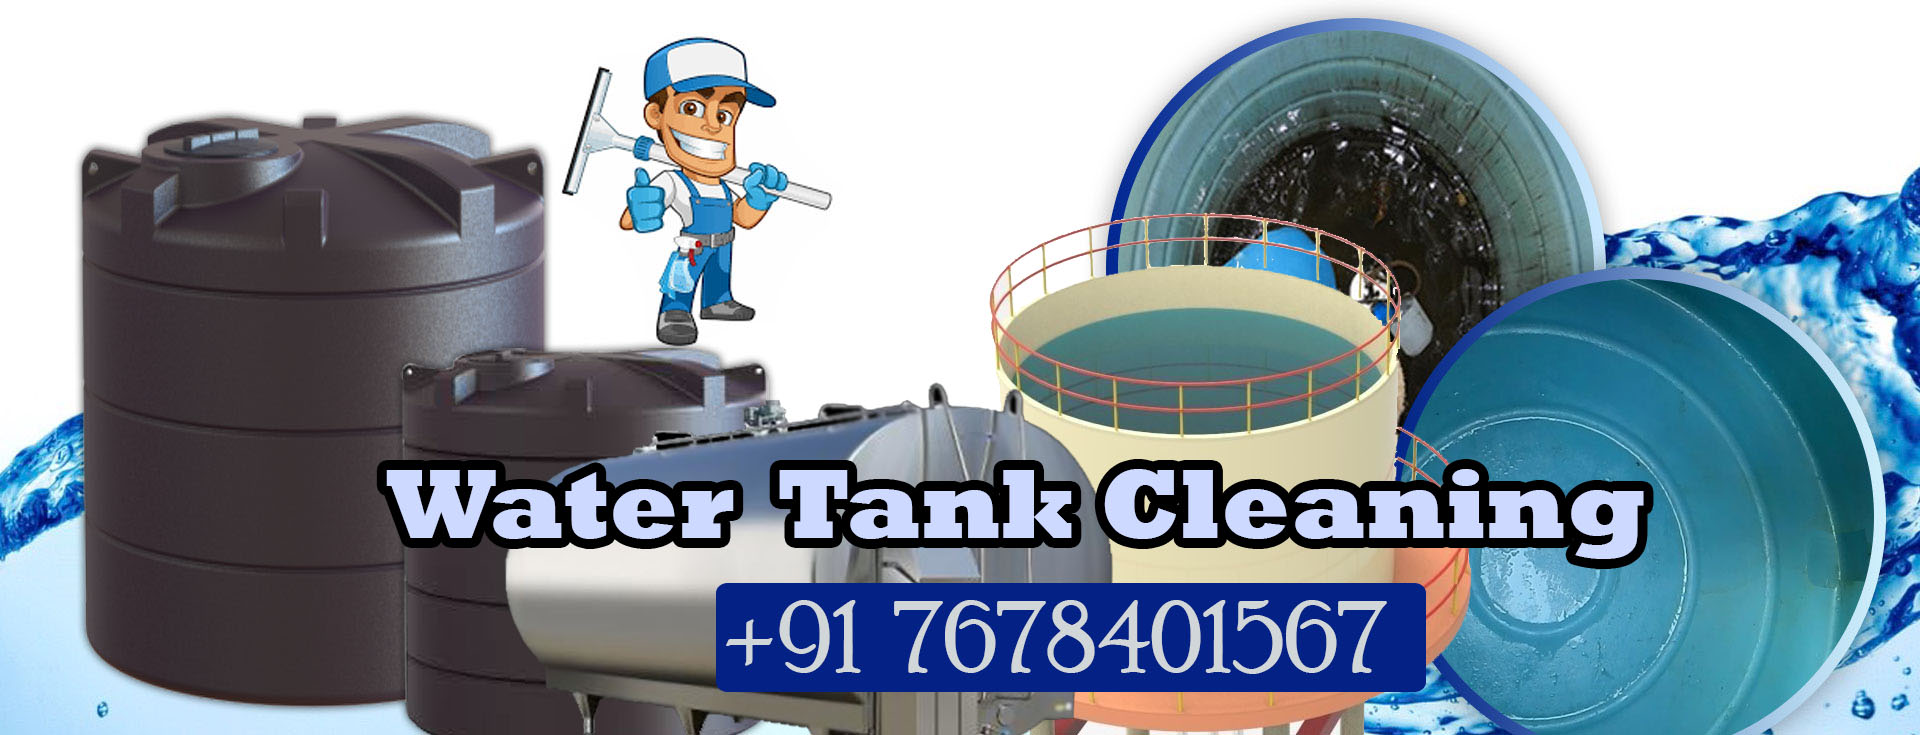 Overhead Water Tank Cleaning